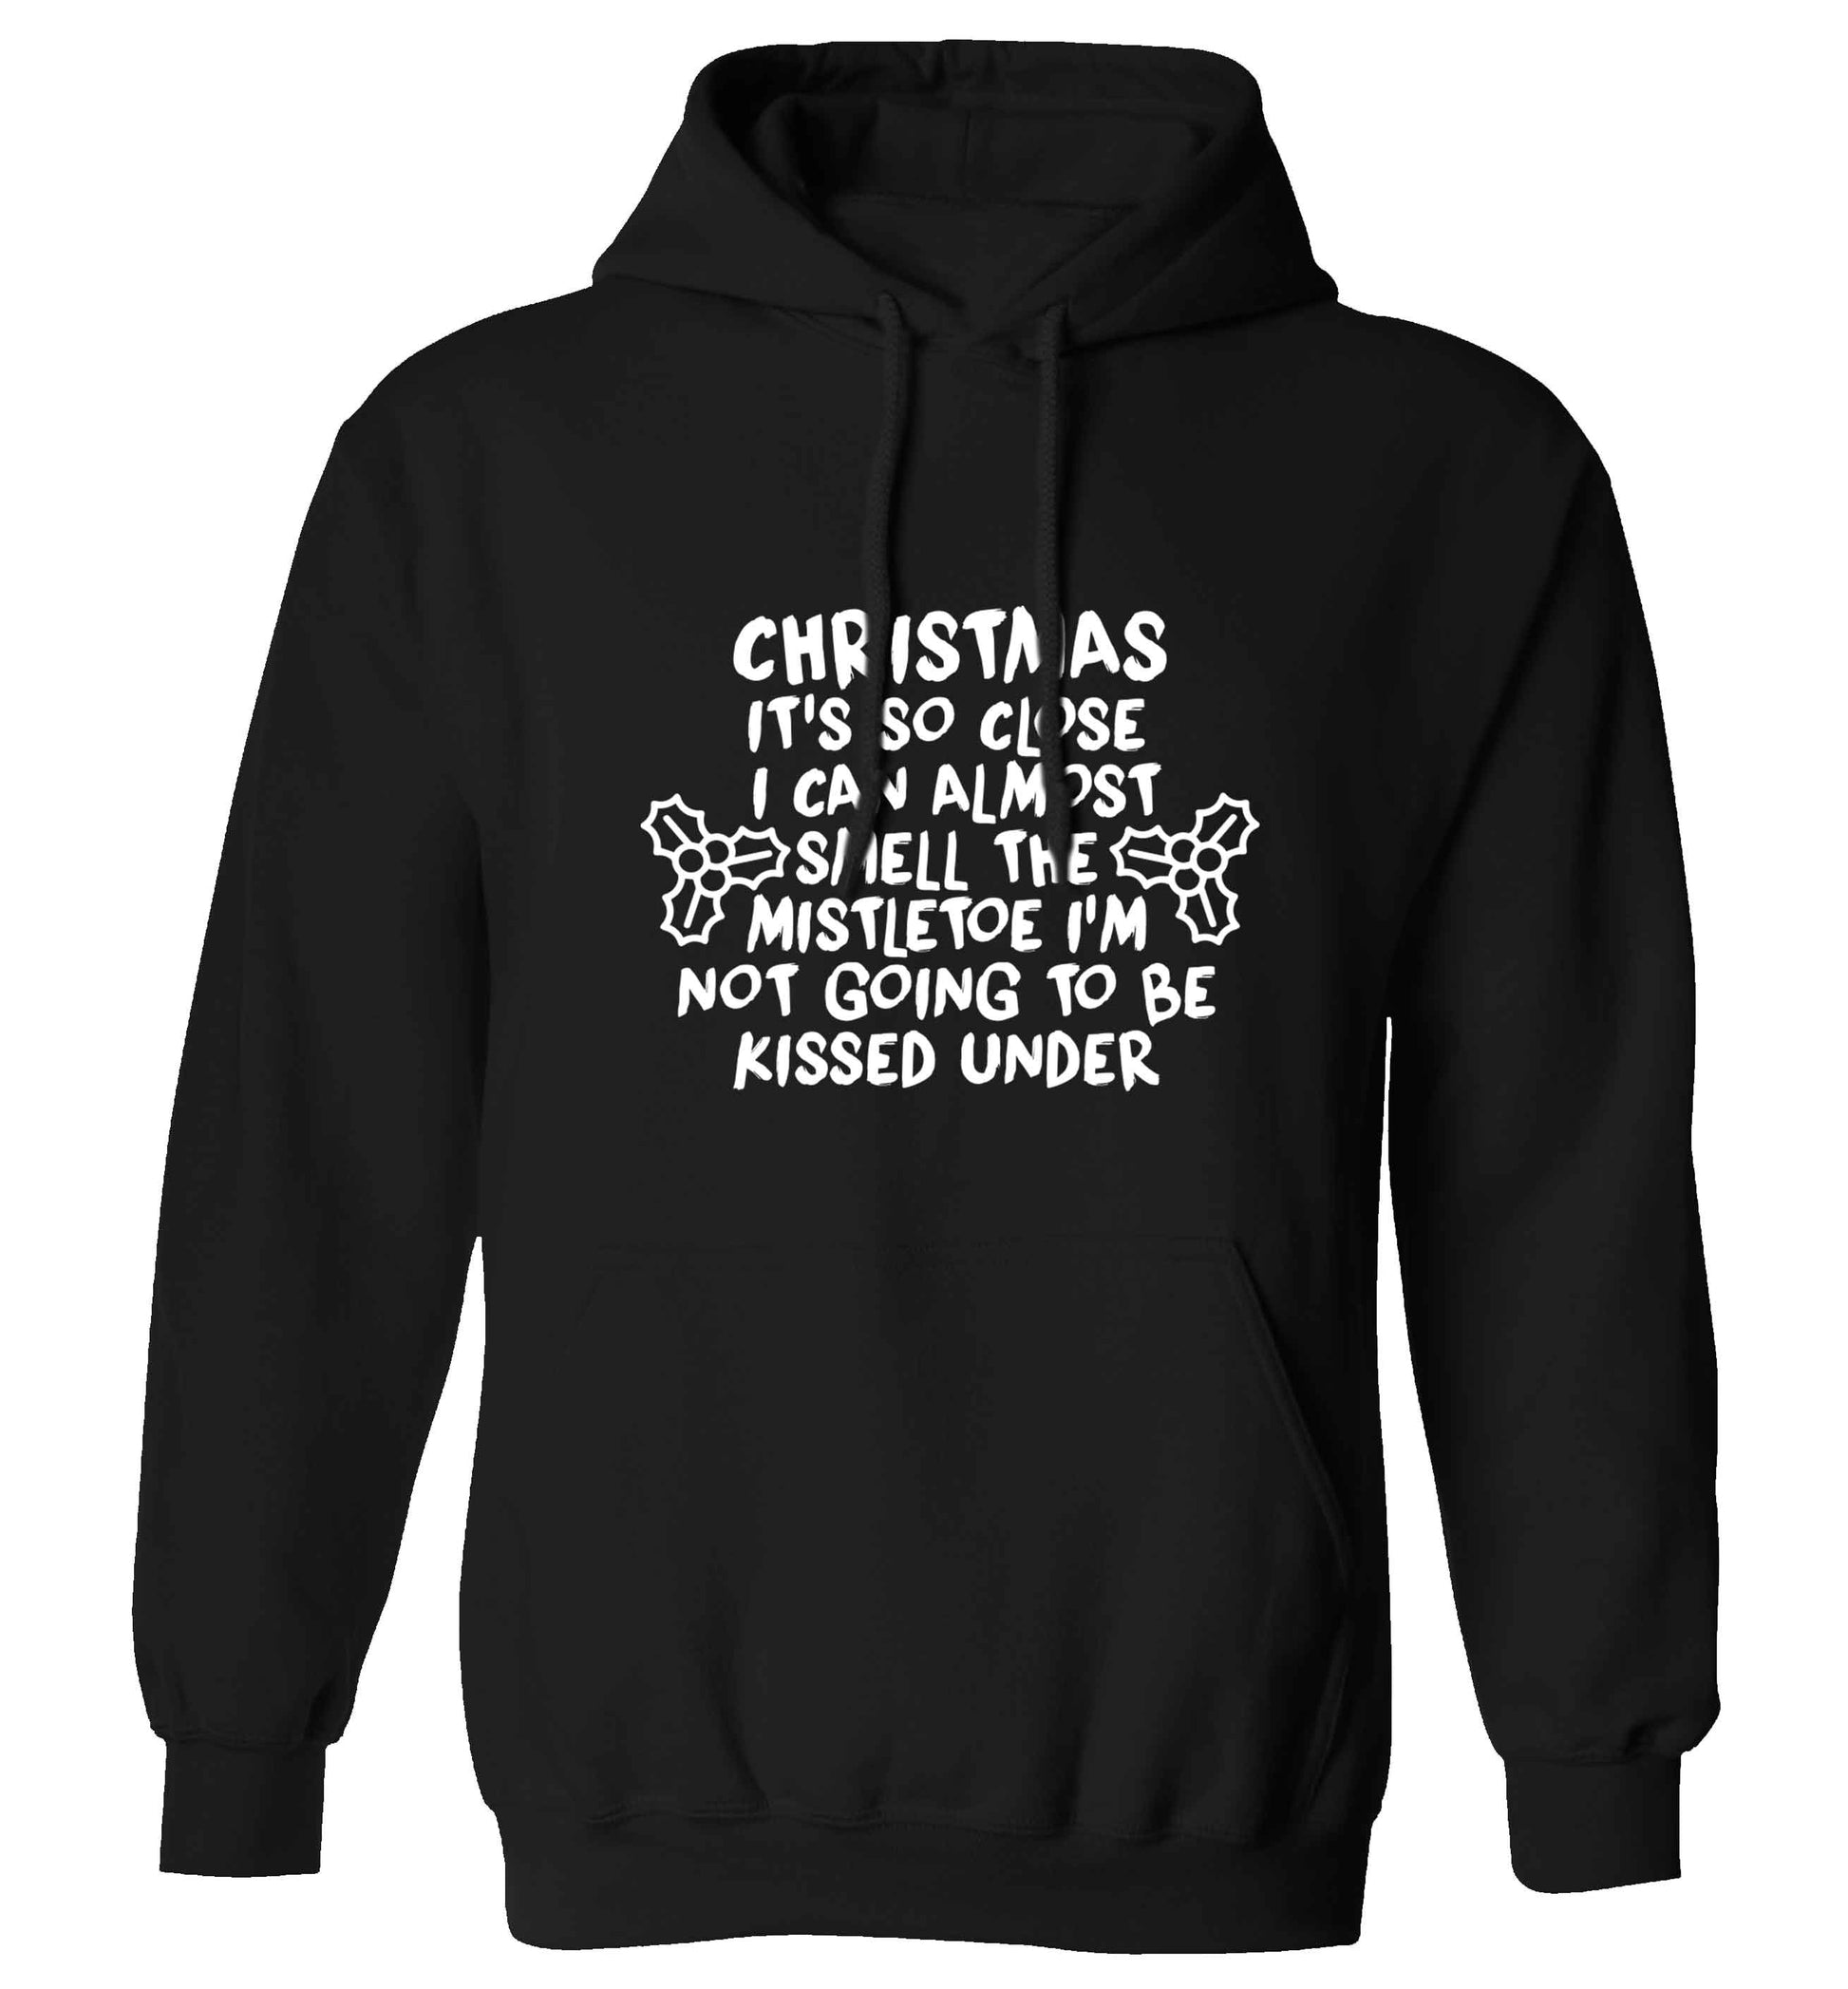 Christmas it's so close I can almost smell the misteltoe I'm not going to be kissed under adults unisex black hoodie 2XL